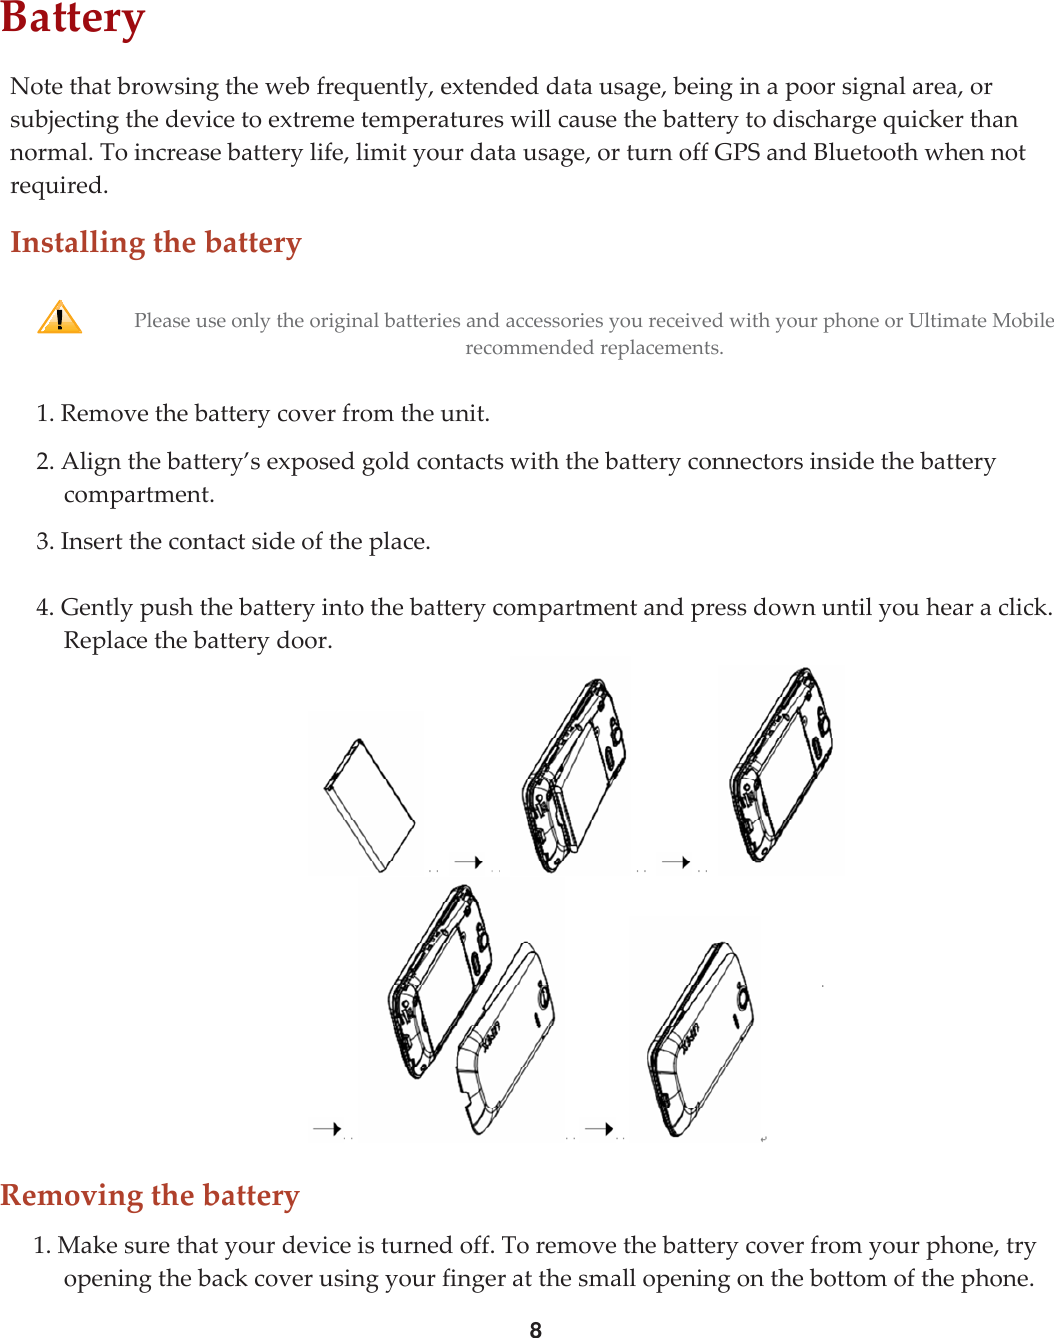 8BatteryNotethatbrowsingthewebfrequently,extendeddatausage,beinginapoorsignalarea,orsubjectingthedevicetoextremetemperatureswillcausethebatterytodischargequickerthannormal.Toincreasebatterylife,limityourdatausage,orturnoffGPSandBluetoothwhennotrequired.InstallingthebatteryPleaseuseonlytheoriginalbatteriesandaccessoriesyoureceivedwithyourphoneorUltimateMobilerecommendedreplacements.1.Removethebatterycoverfromtheunit.2.Alignthebattery’sexposedgoldcontactswiththebatteryconnectorsinsidethebatterycompartment.3.Insertthecontactsideoftheplace.4.Gentlypushthebatteryintothebatterycompartmentandpressdownuntilyouhearaclick.Replacethebatterydoor.Removingthebattery1.Makesurethatyourdeviceisturnedoff.Toremovethebatterycoverfromyourphone,tryopeningthebackcoverusingyourfingeratthesmallopeningonthebottomofthephone.